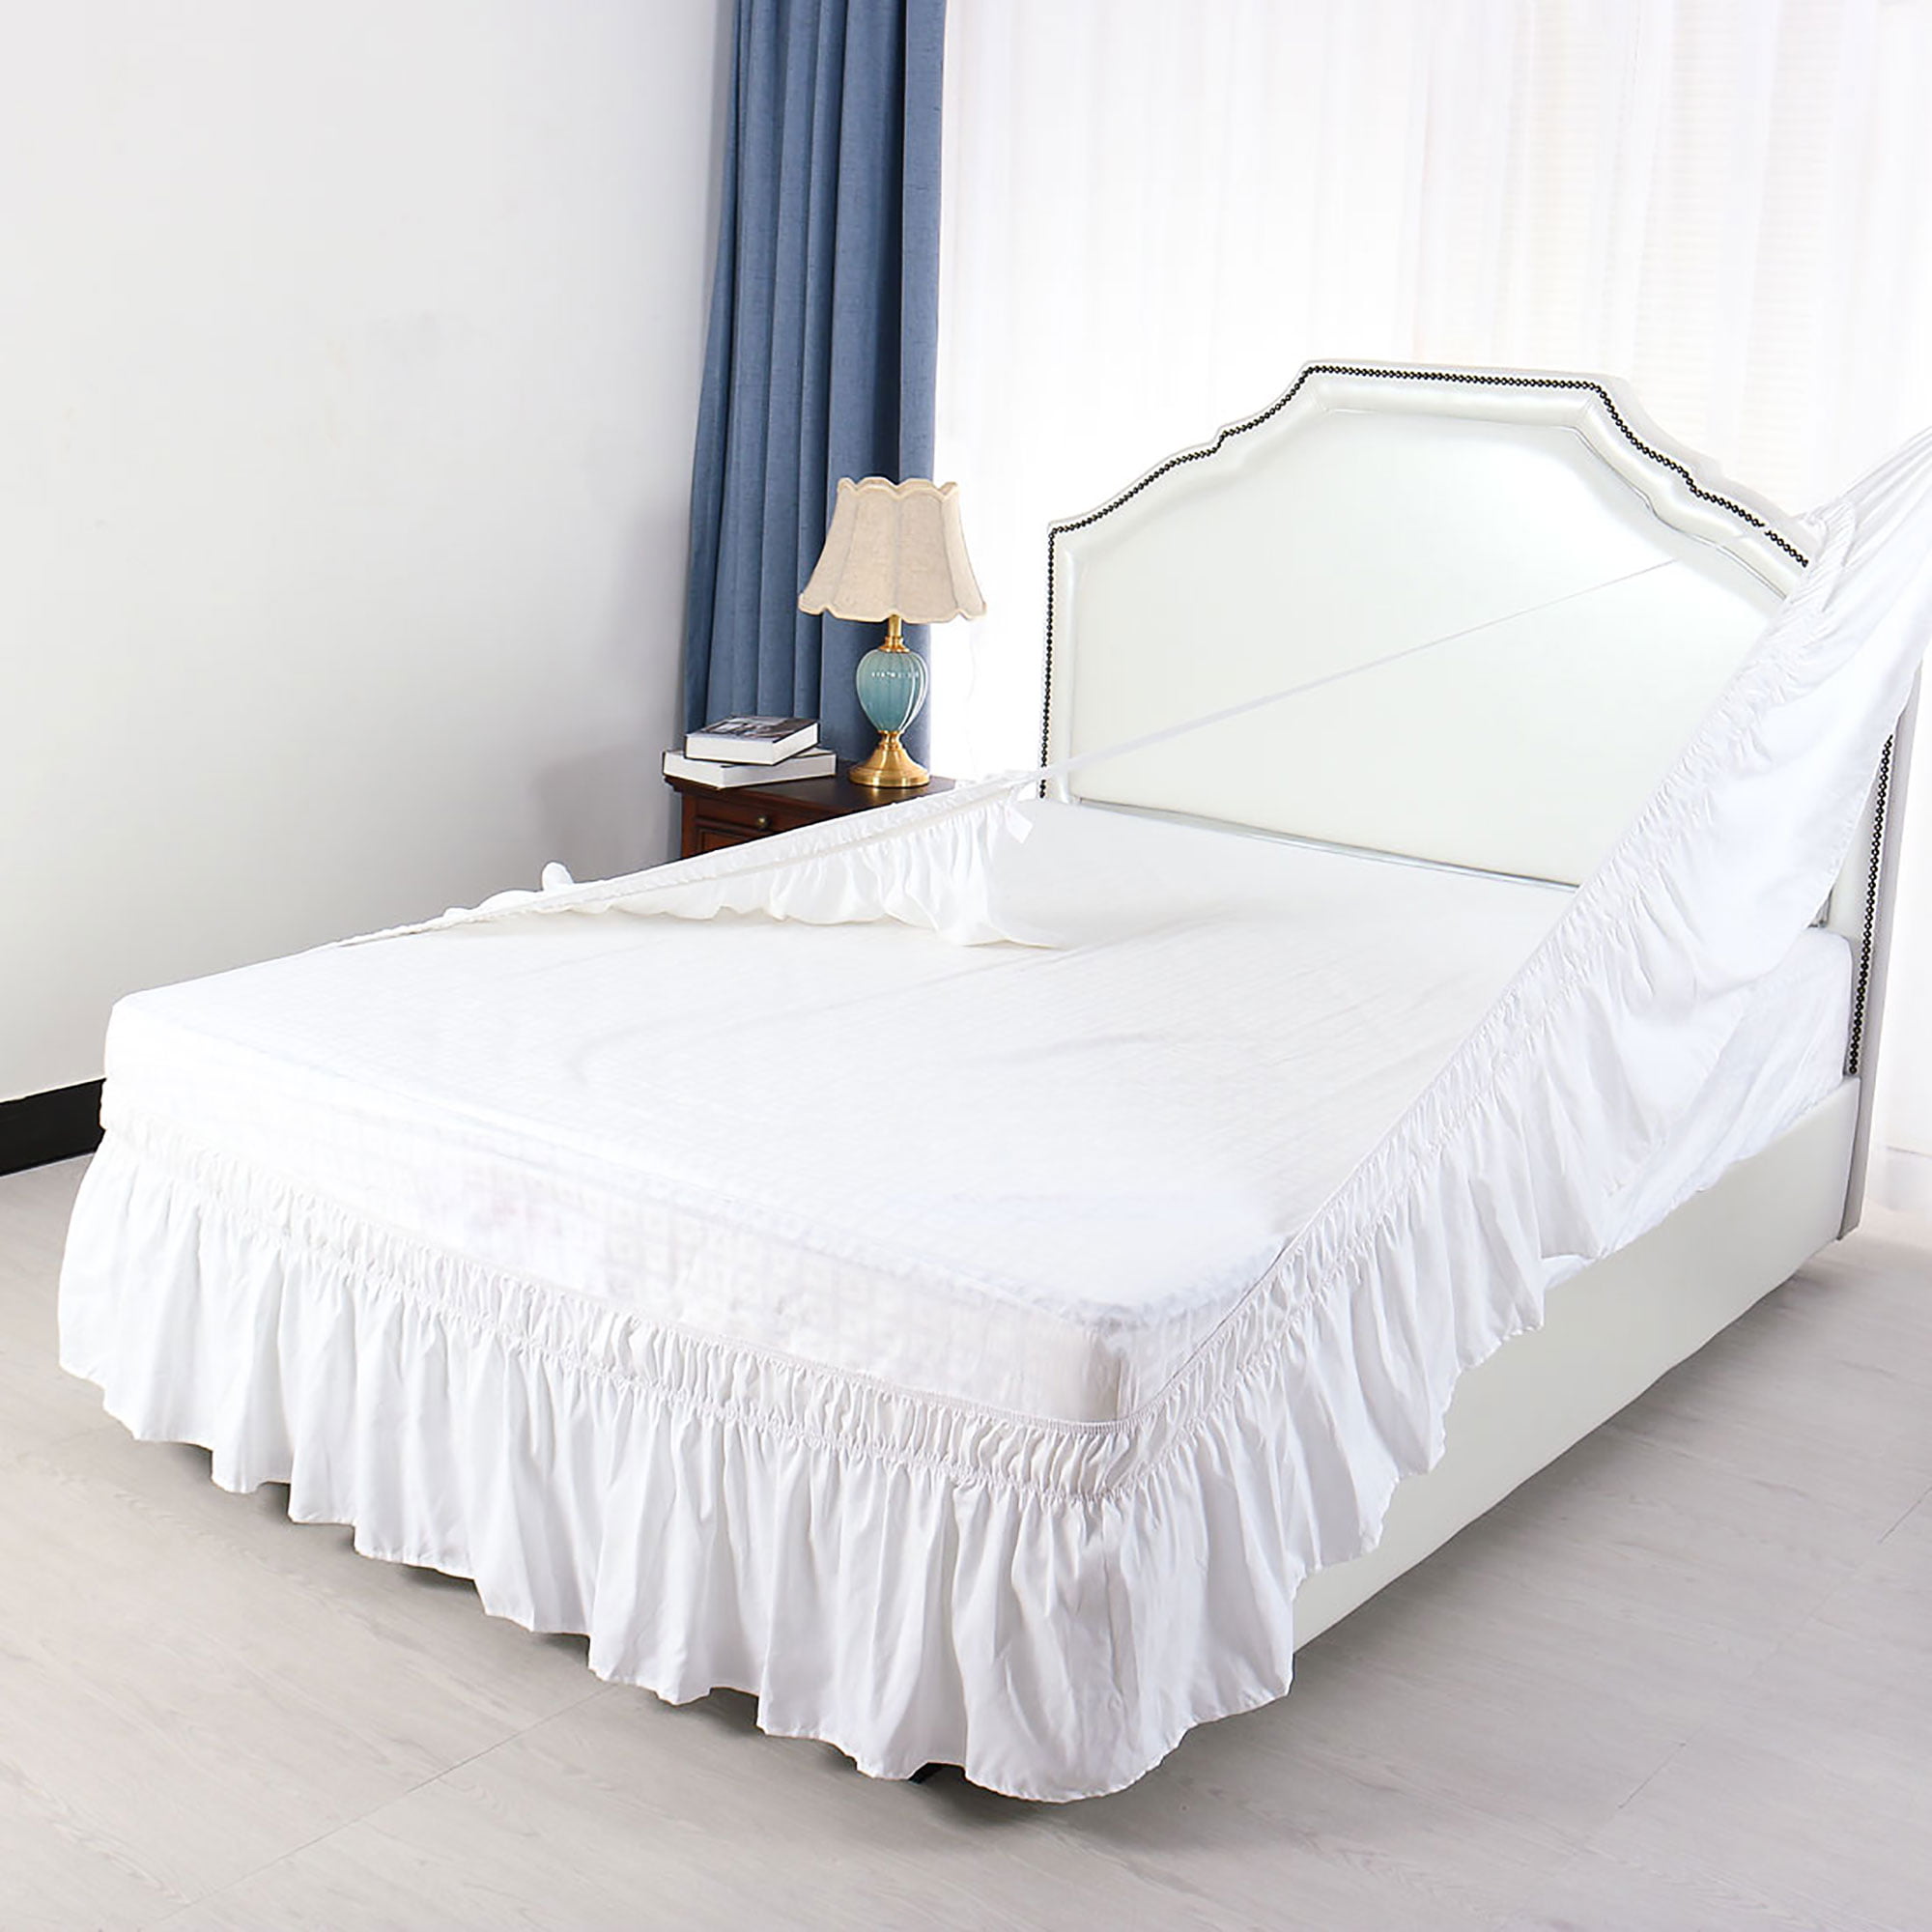 Creative Wrap Around Bed Skirt Polyester Elastic Anti Dust Ruffle Fabric Sides Silky Soft Bed Skirt Wrinkle Free Classic Stylish Bed Skirt 1pc White US-King Type 